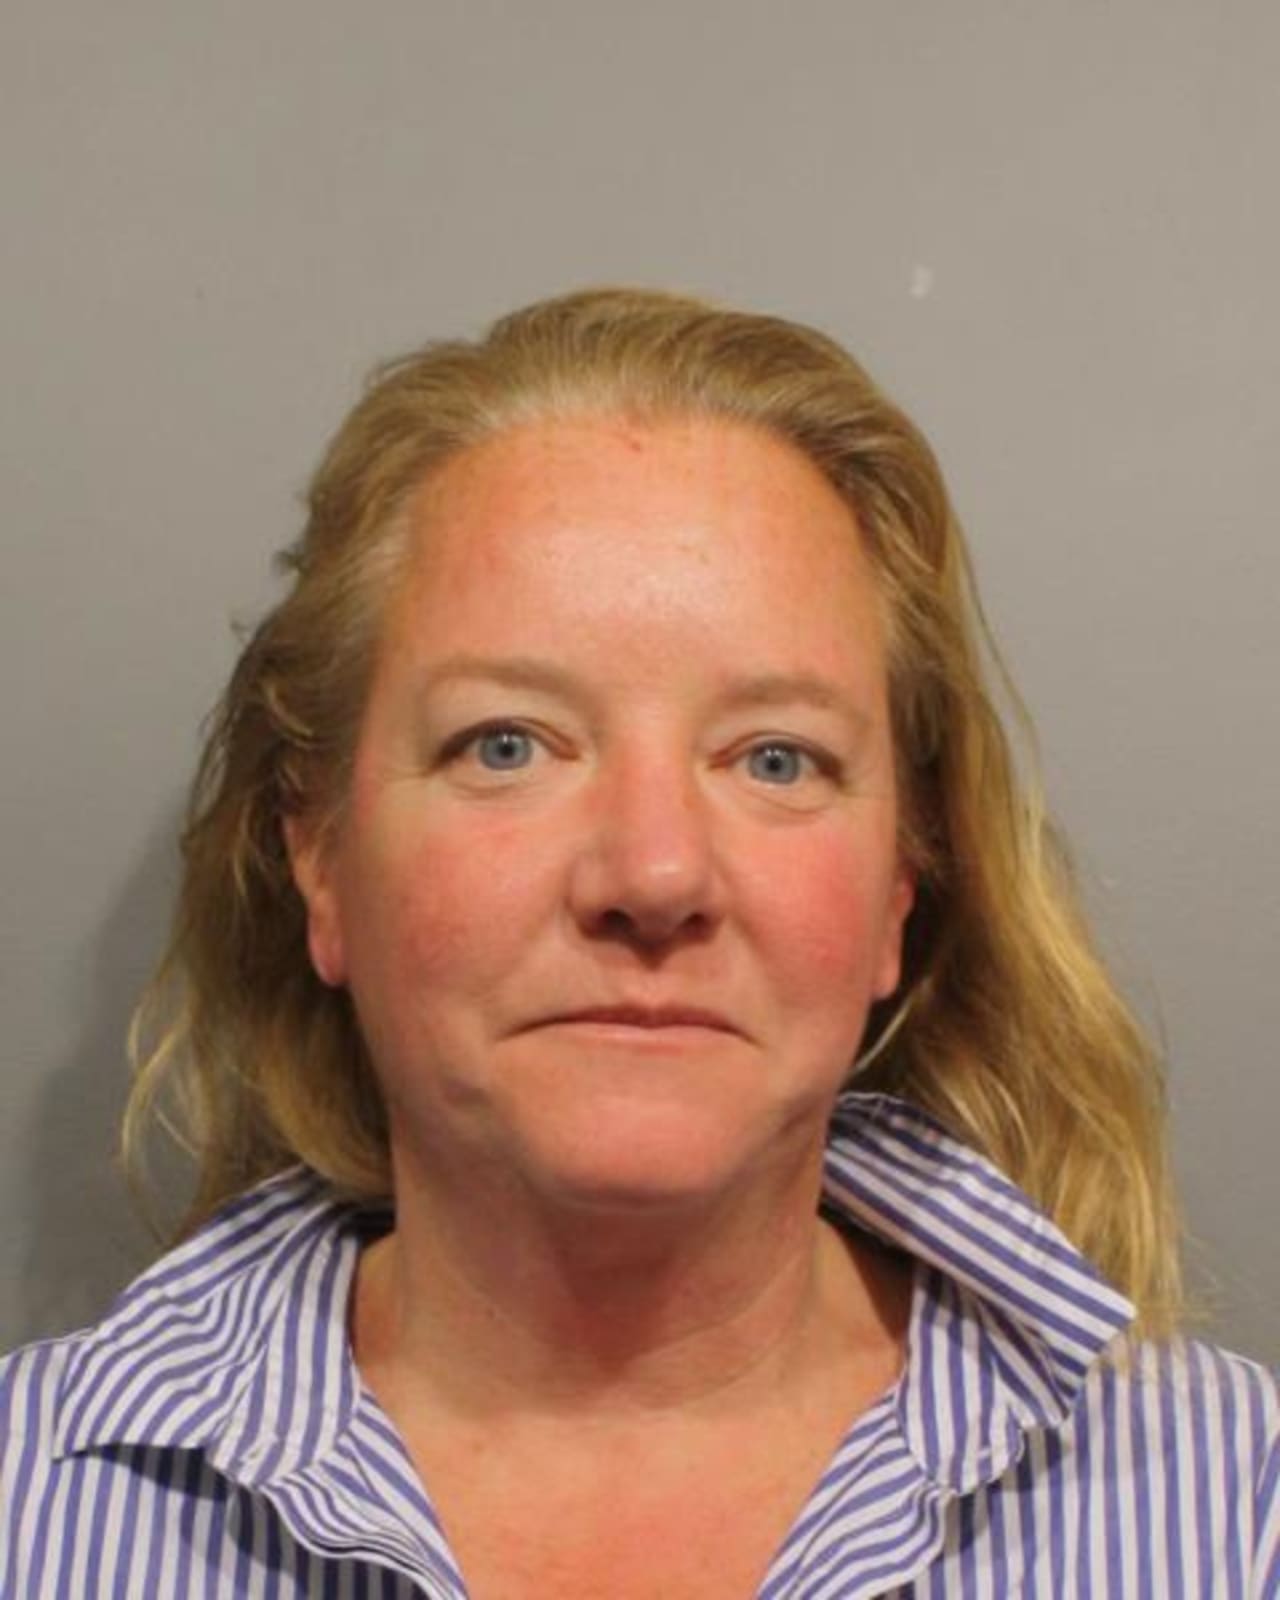 Jeanne Tienken, of Belmont, Mass., turned herself in to Wilton police in December after learning of a warrant for her arrest on charges of harassment and violating a restraining order.